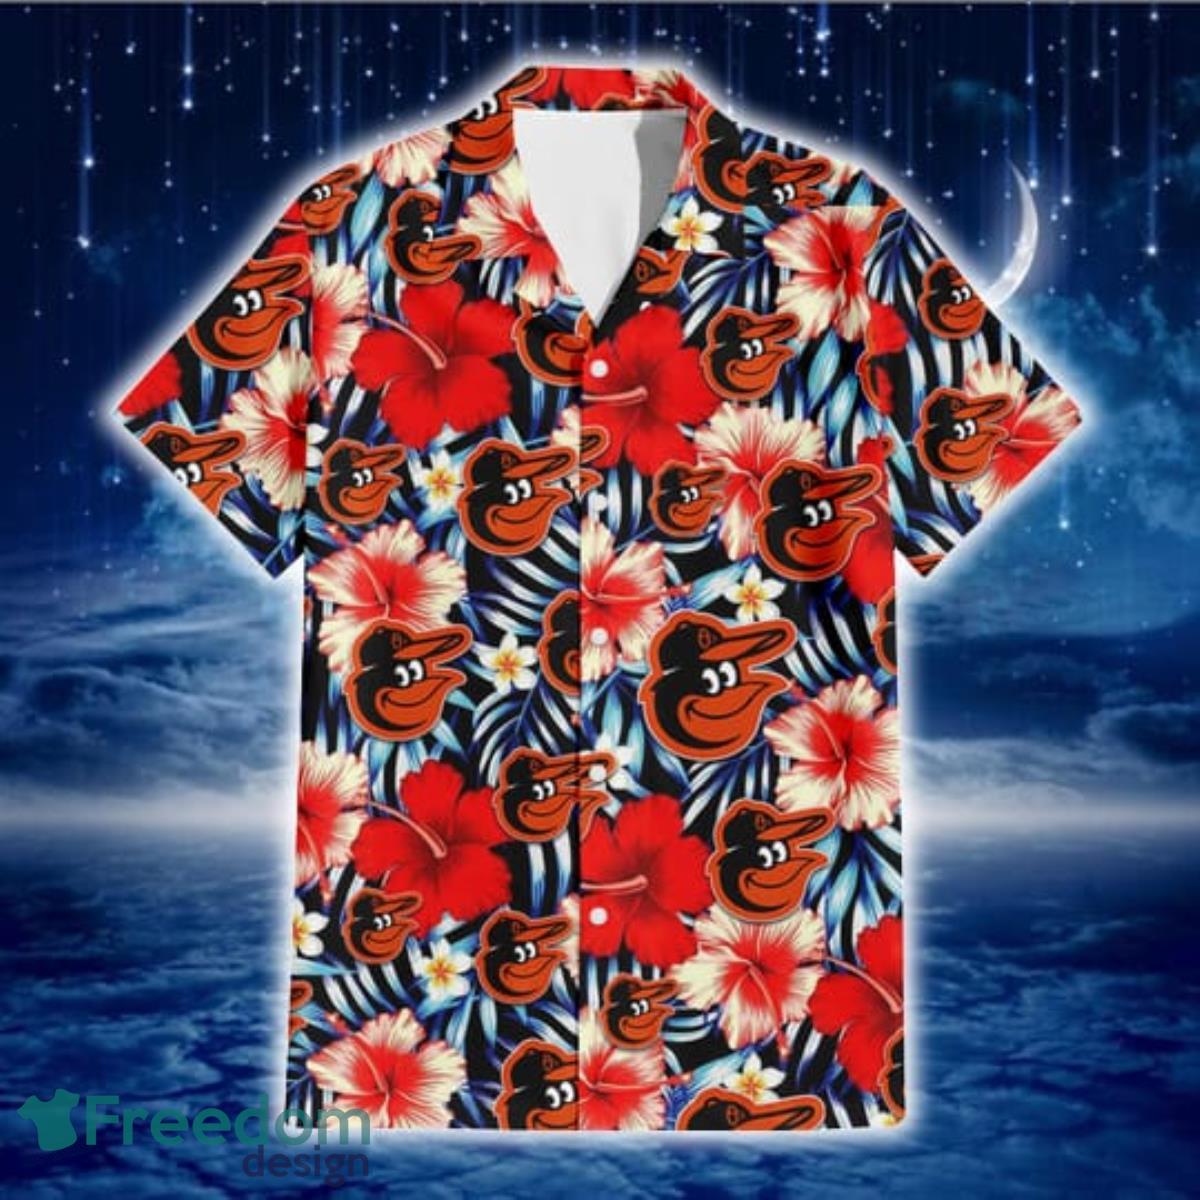 Chicago Cubs Red Hibiscus Green Leaf Dark Background 3D Hawaiian Shirt Gift  For Fans - Freedomdesign